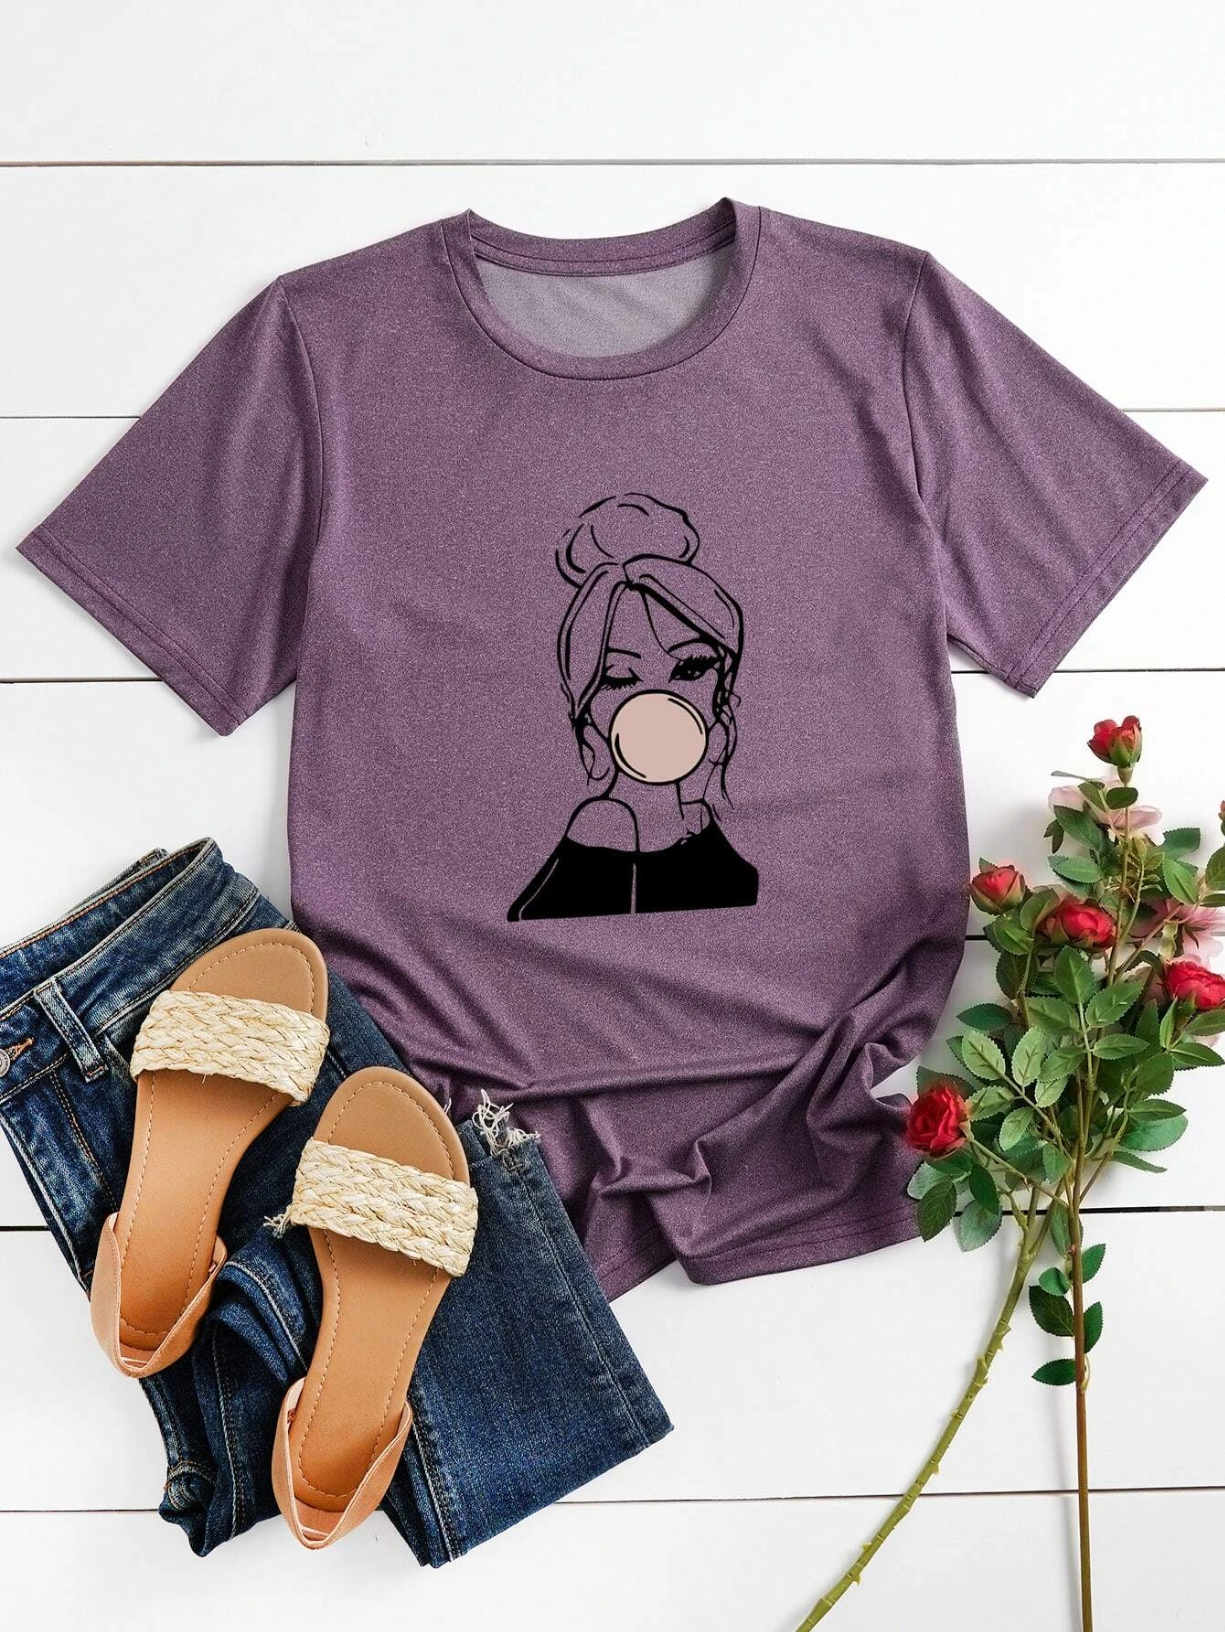 DX056# WomenGraphic Tee T-Shirt